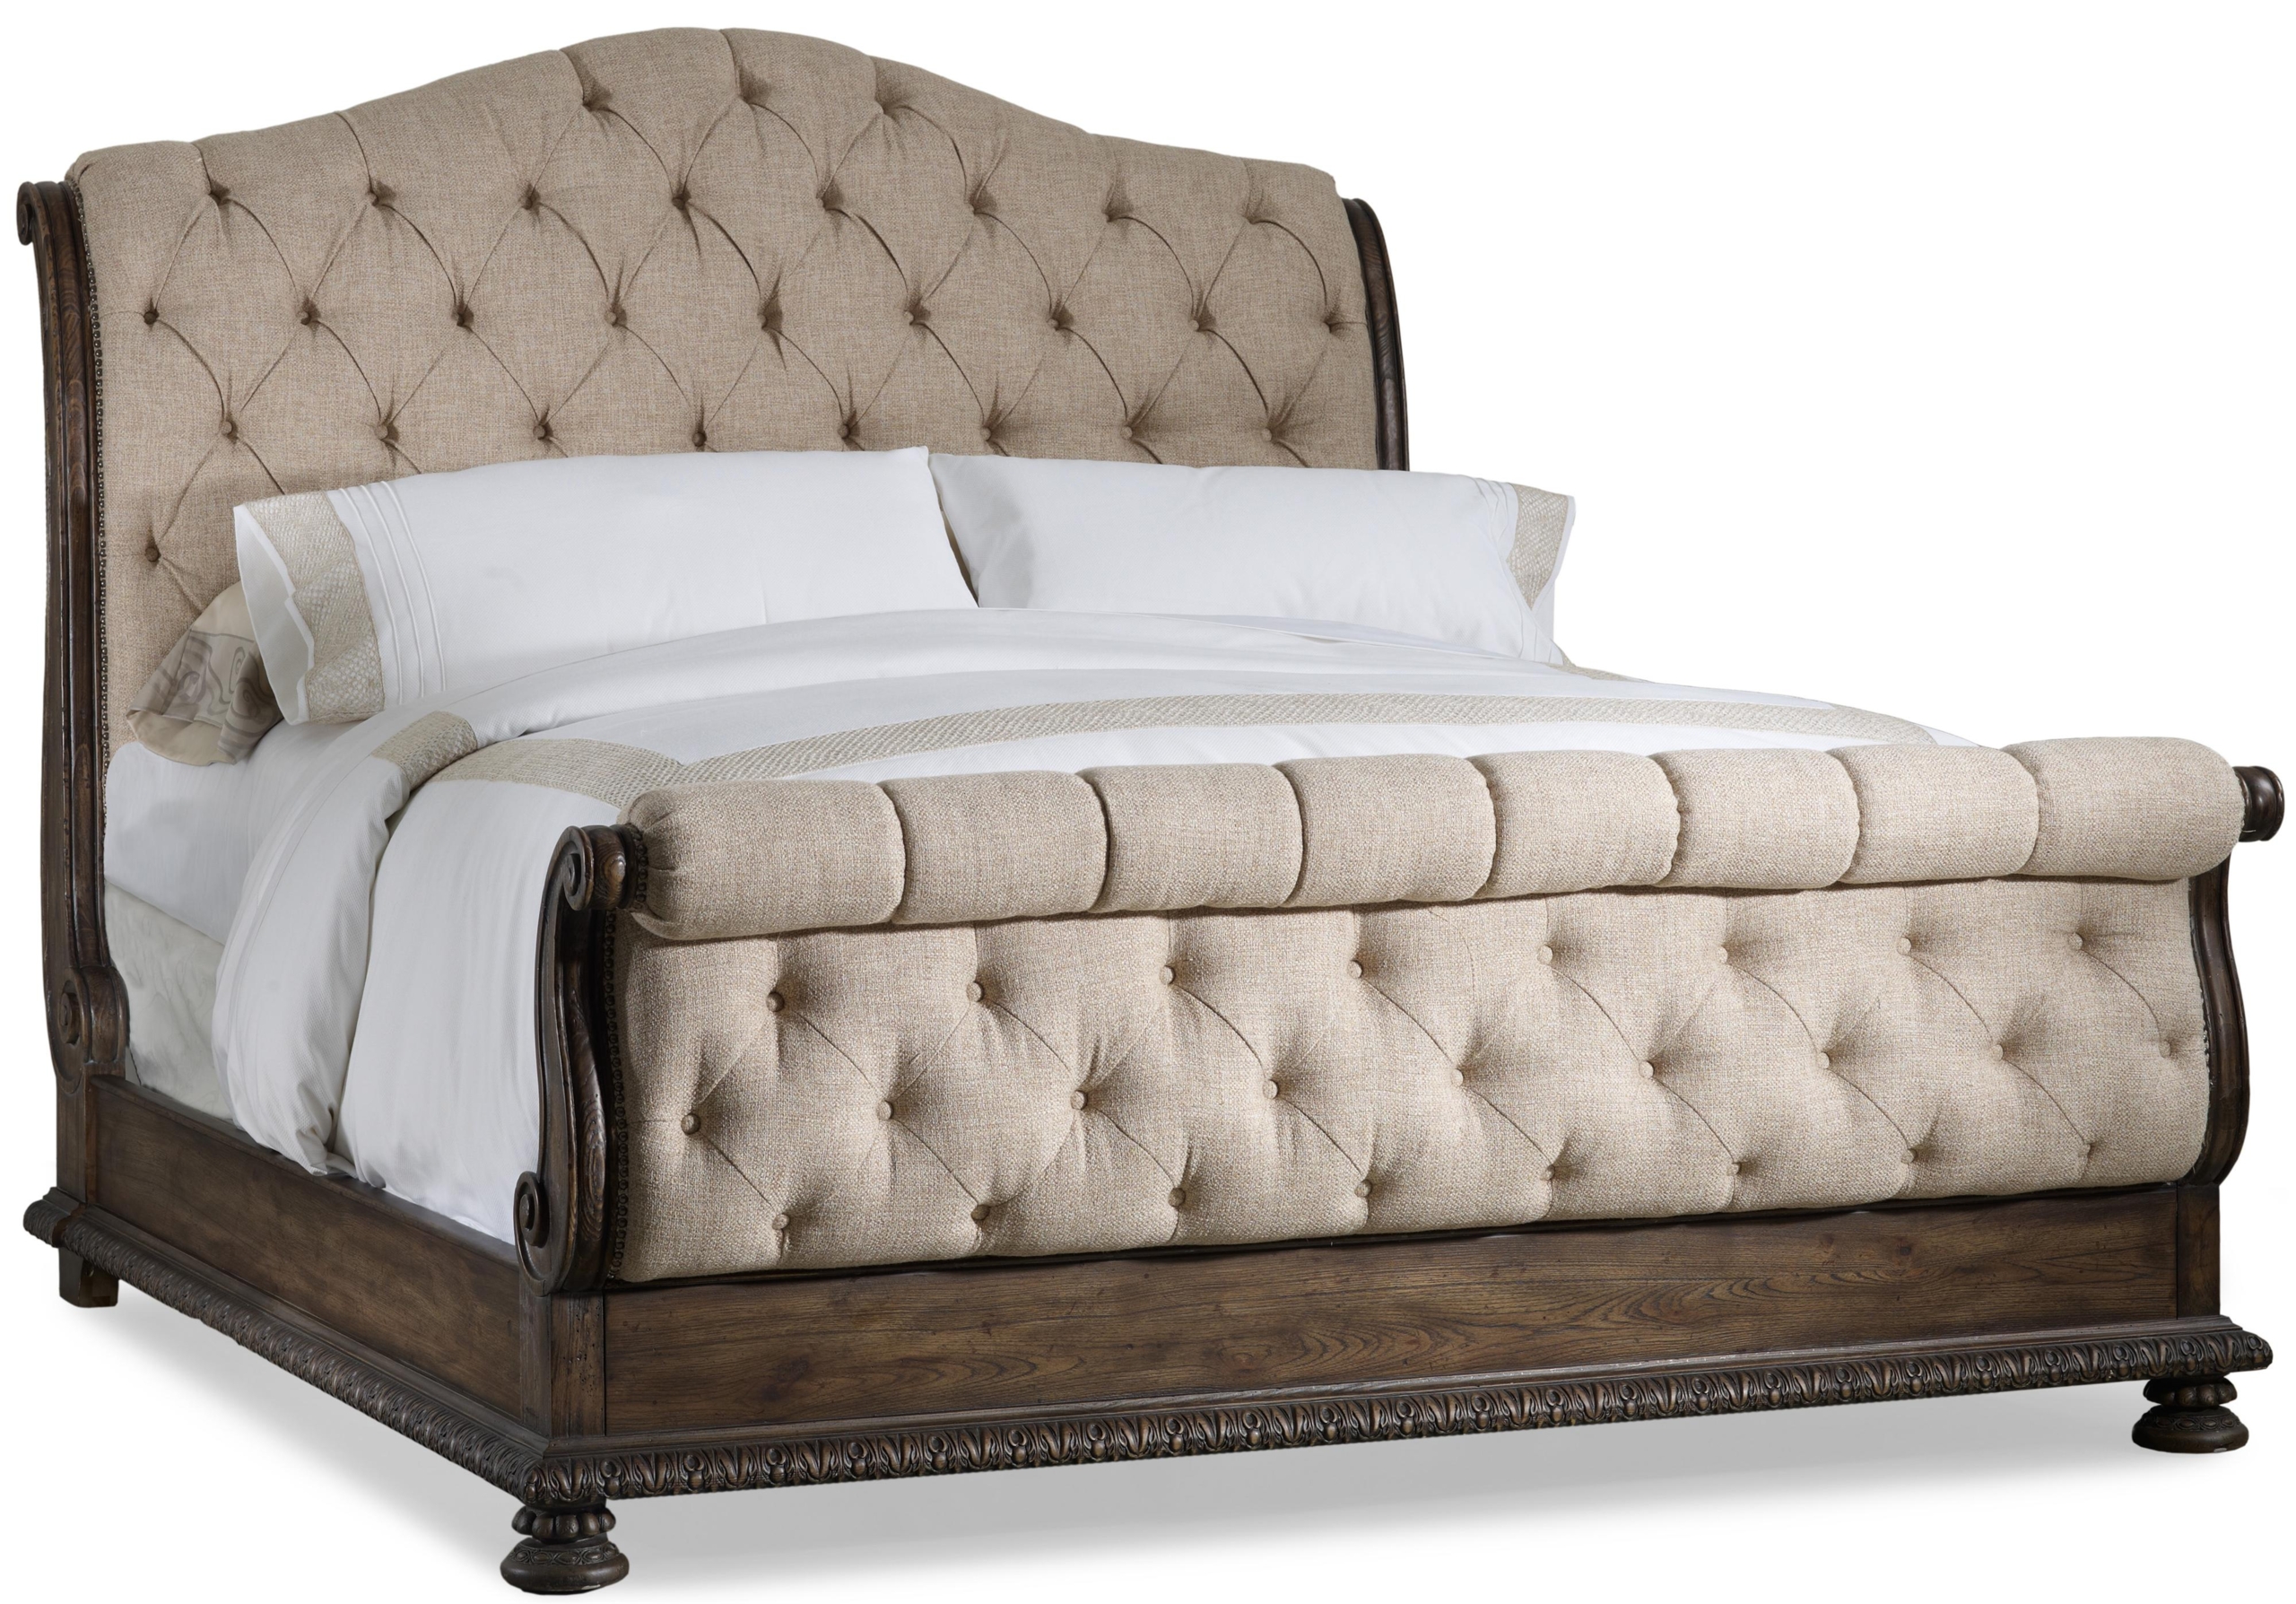 Tufted headboard with wood frame